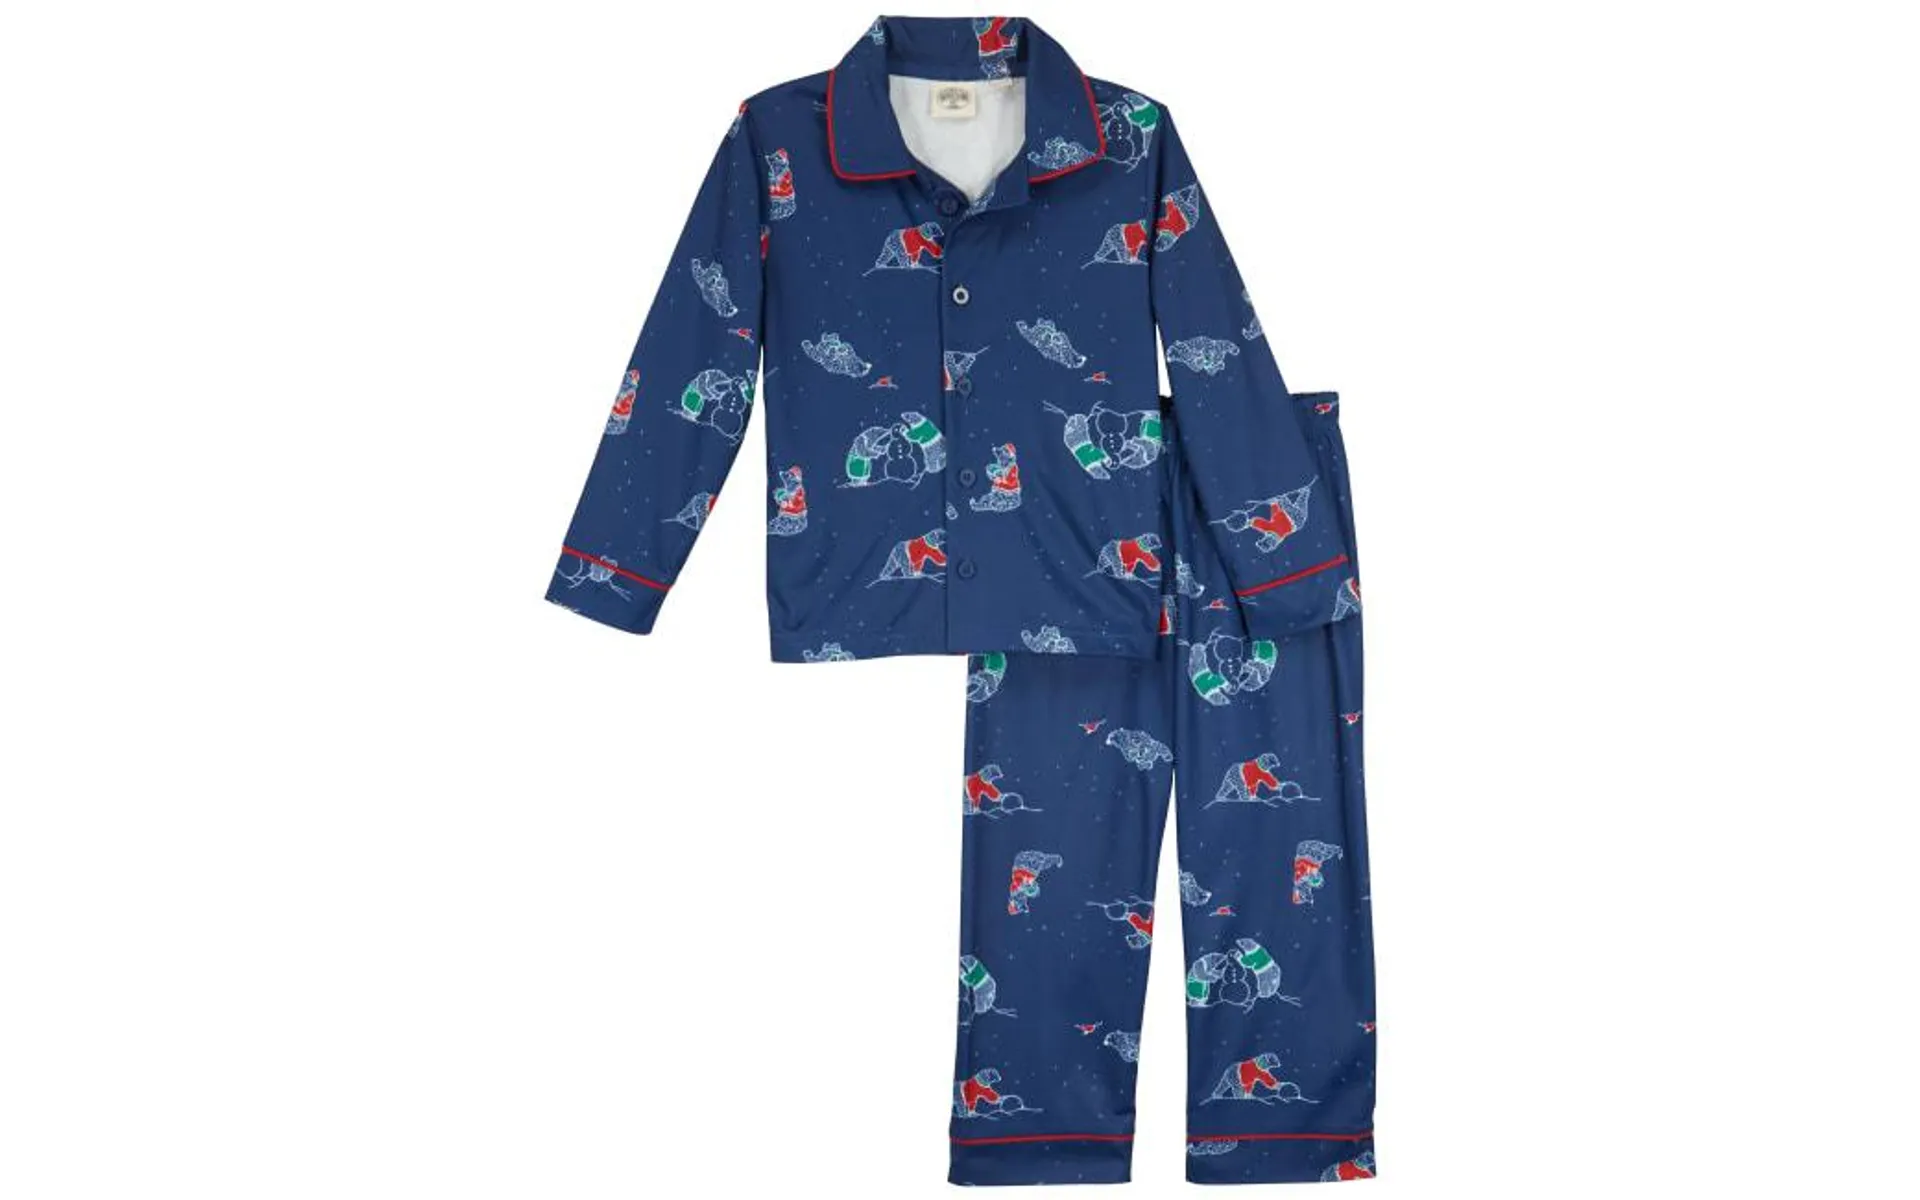 Outdoor Kids Holiday Bear and Snowmen Long-Sleeve Pajamas Set for Babies, Toddlers, or Kids